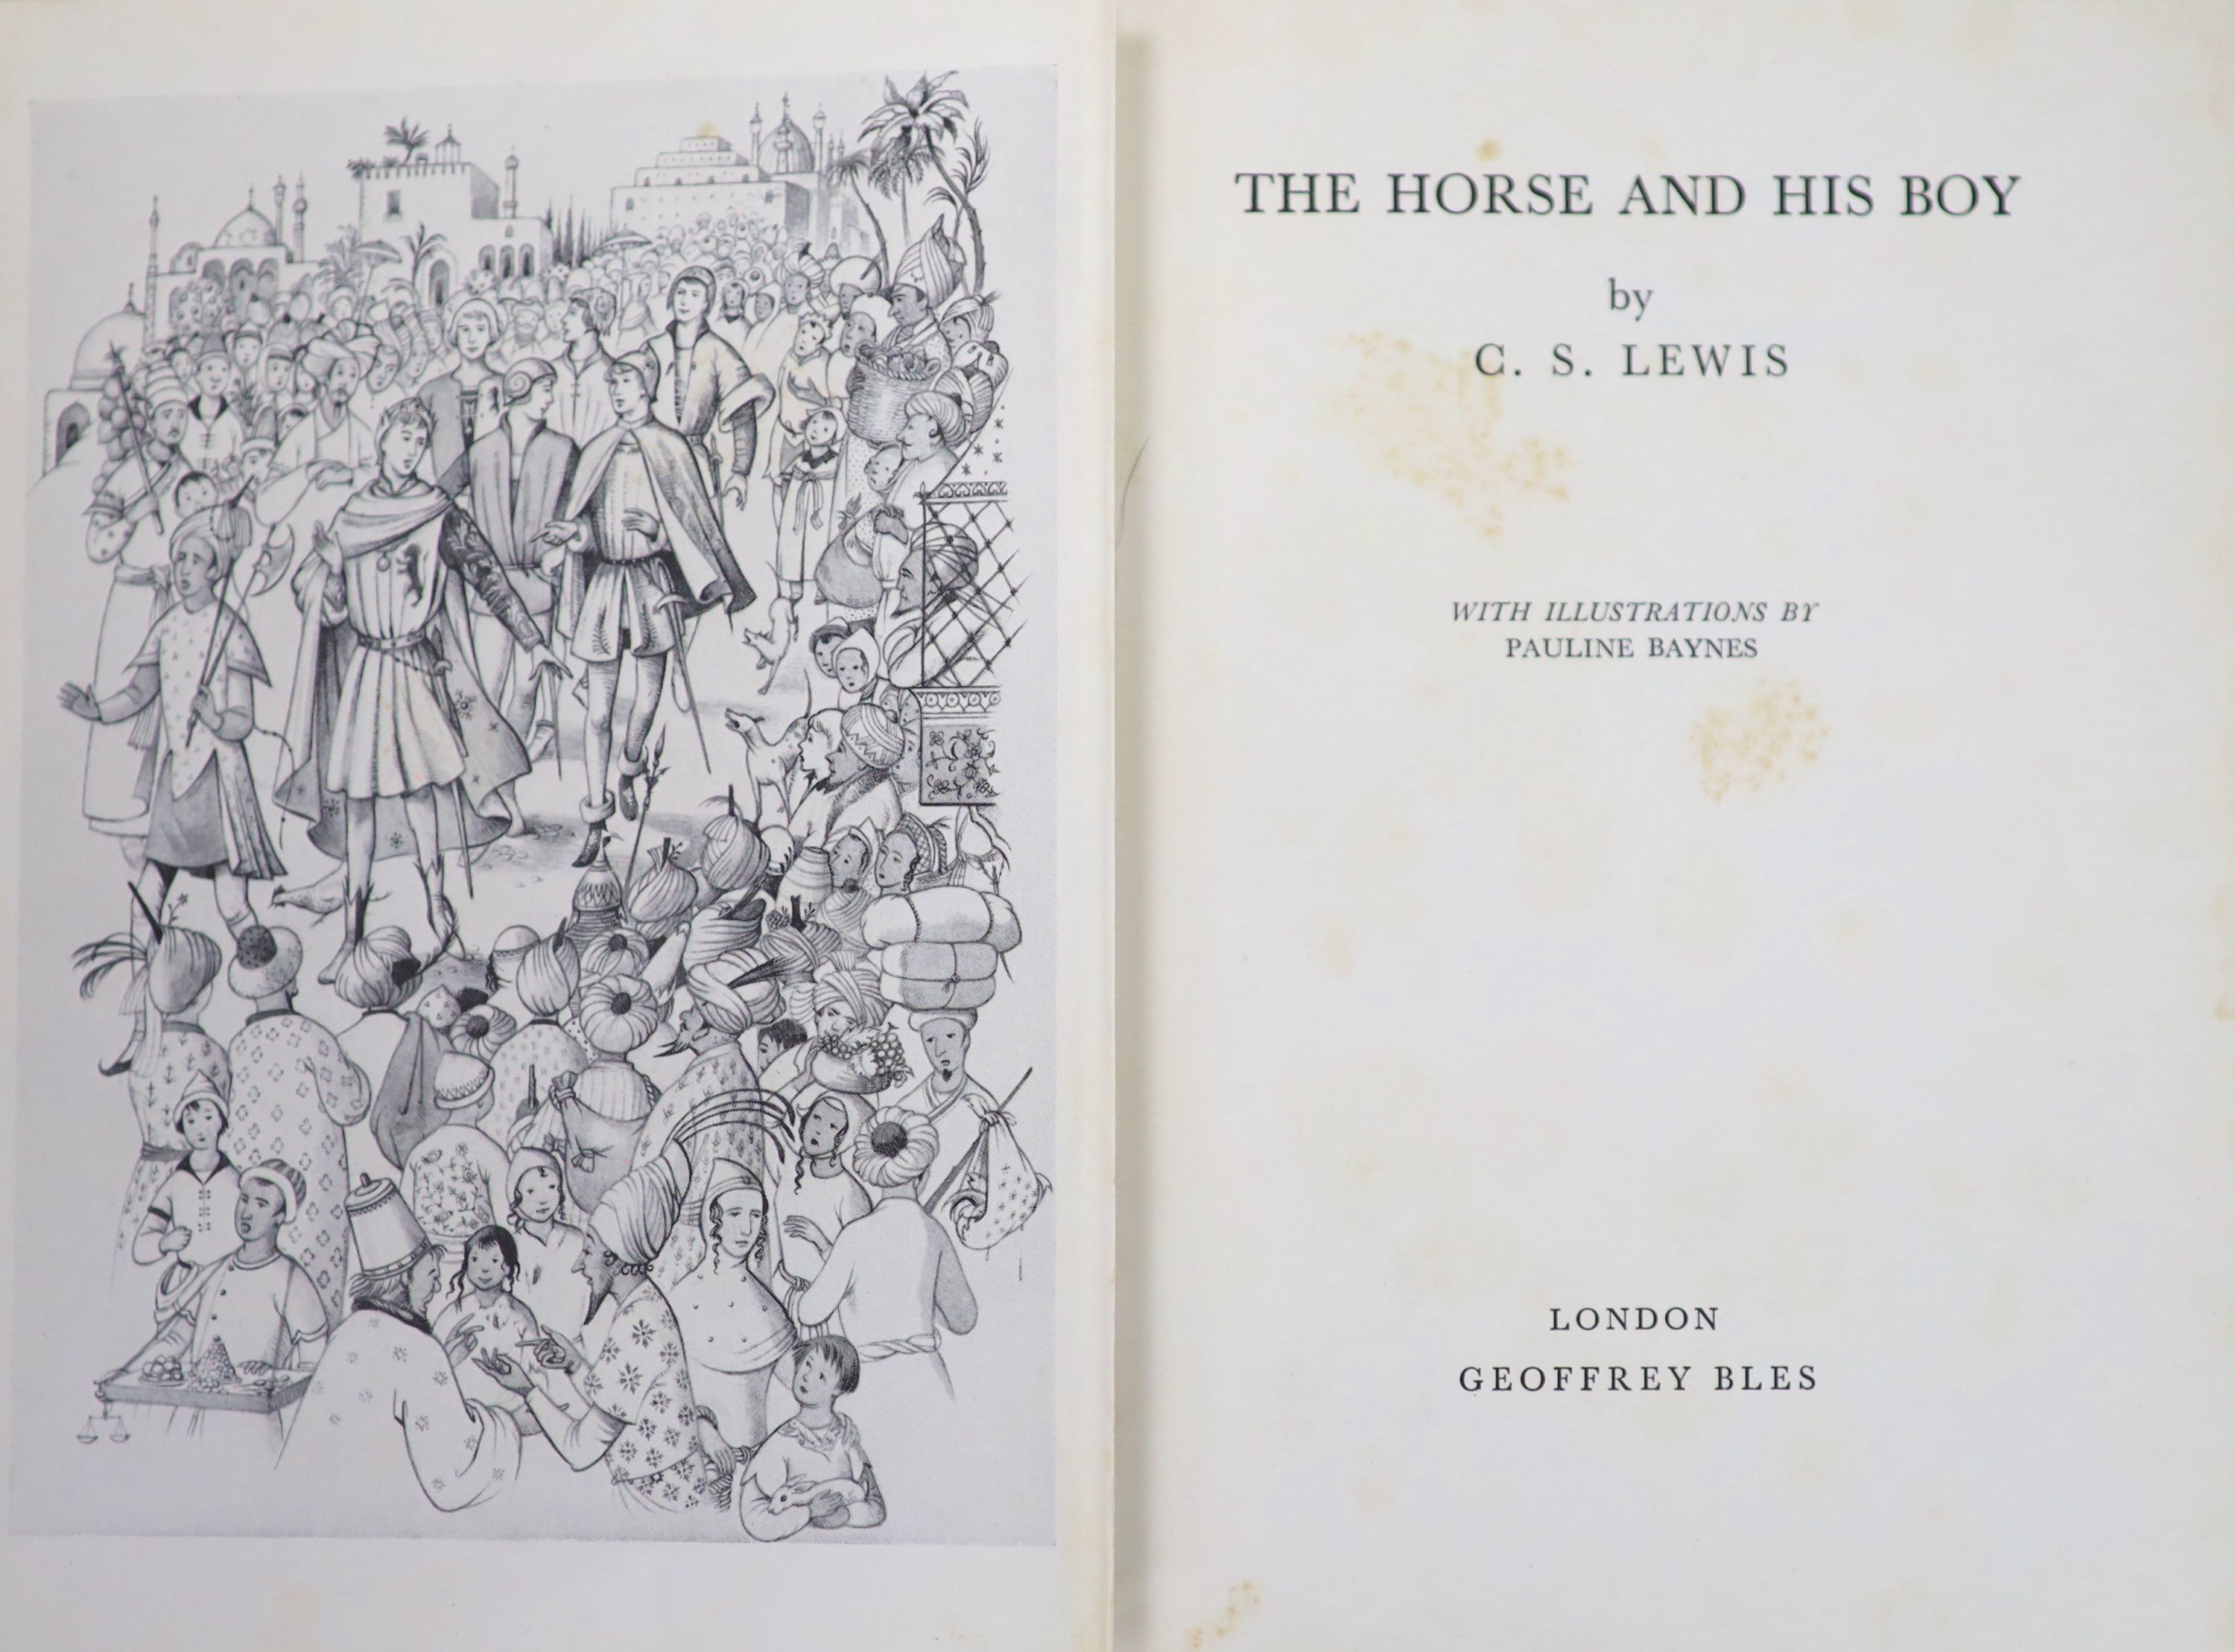 Lewis, Clive Staples - The Horse and His Boy, 1st edition, 8vo, illustrated by Pauline Baynes, frontis plate detached, but present, original cloth, in unclipped d/j, Geoffrey Bles, London, 1954